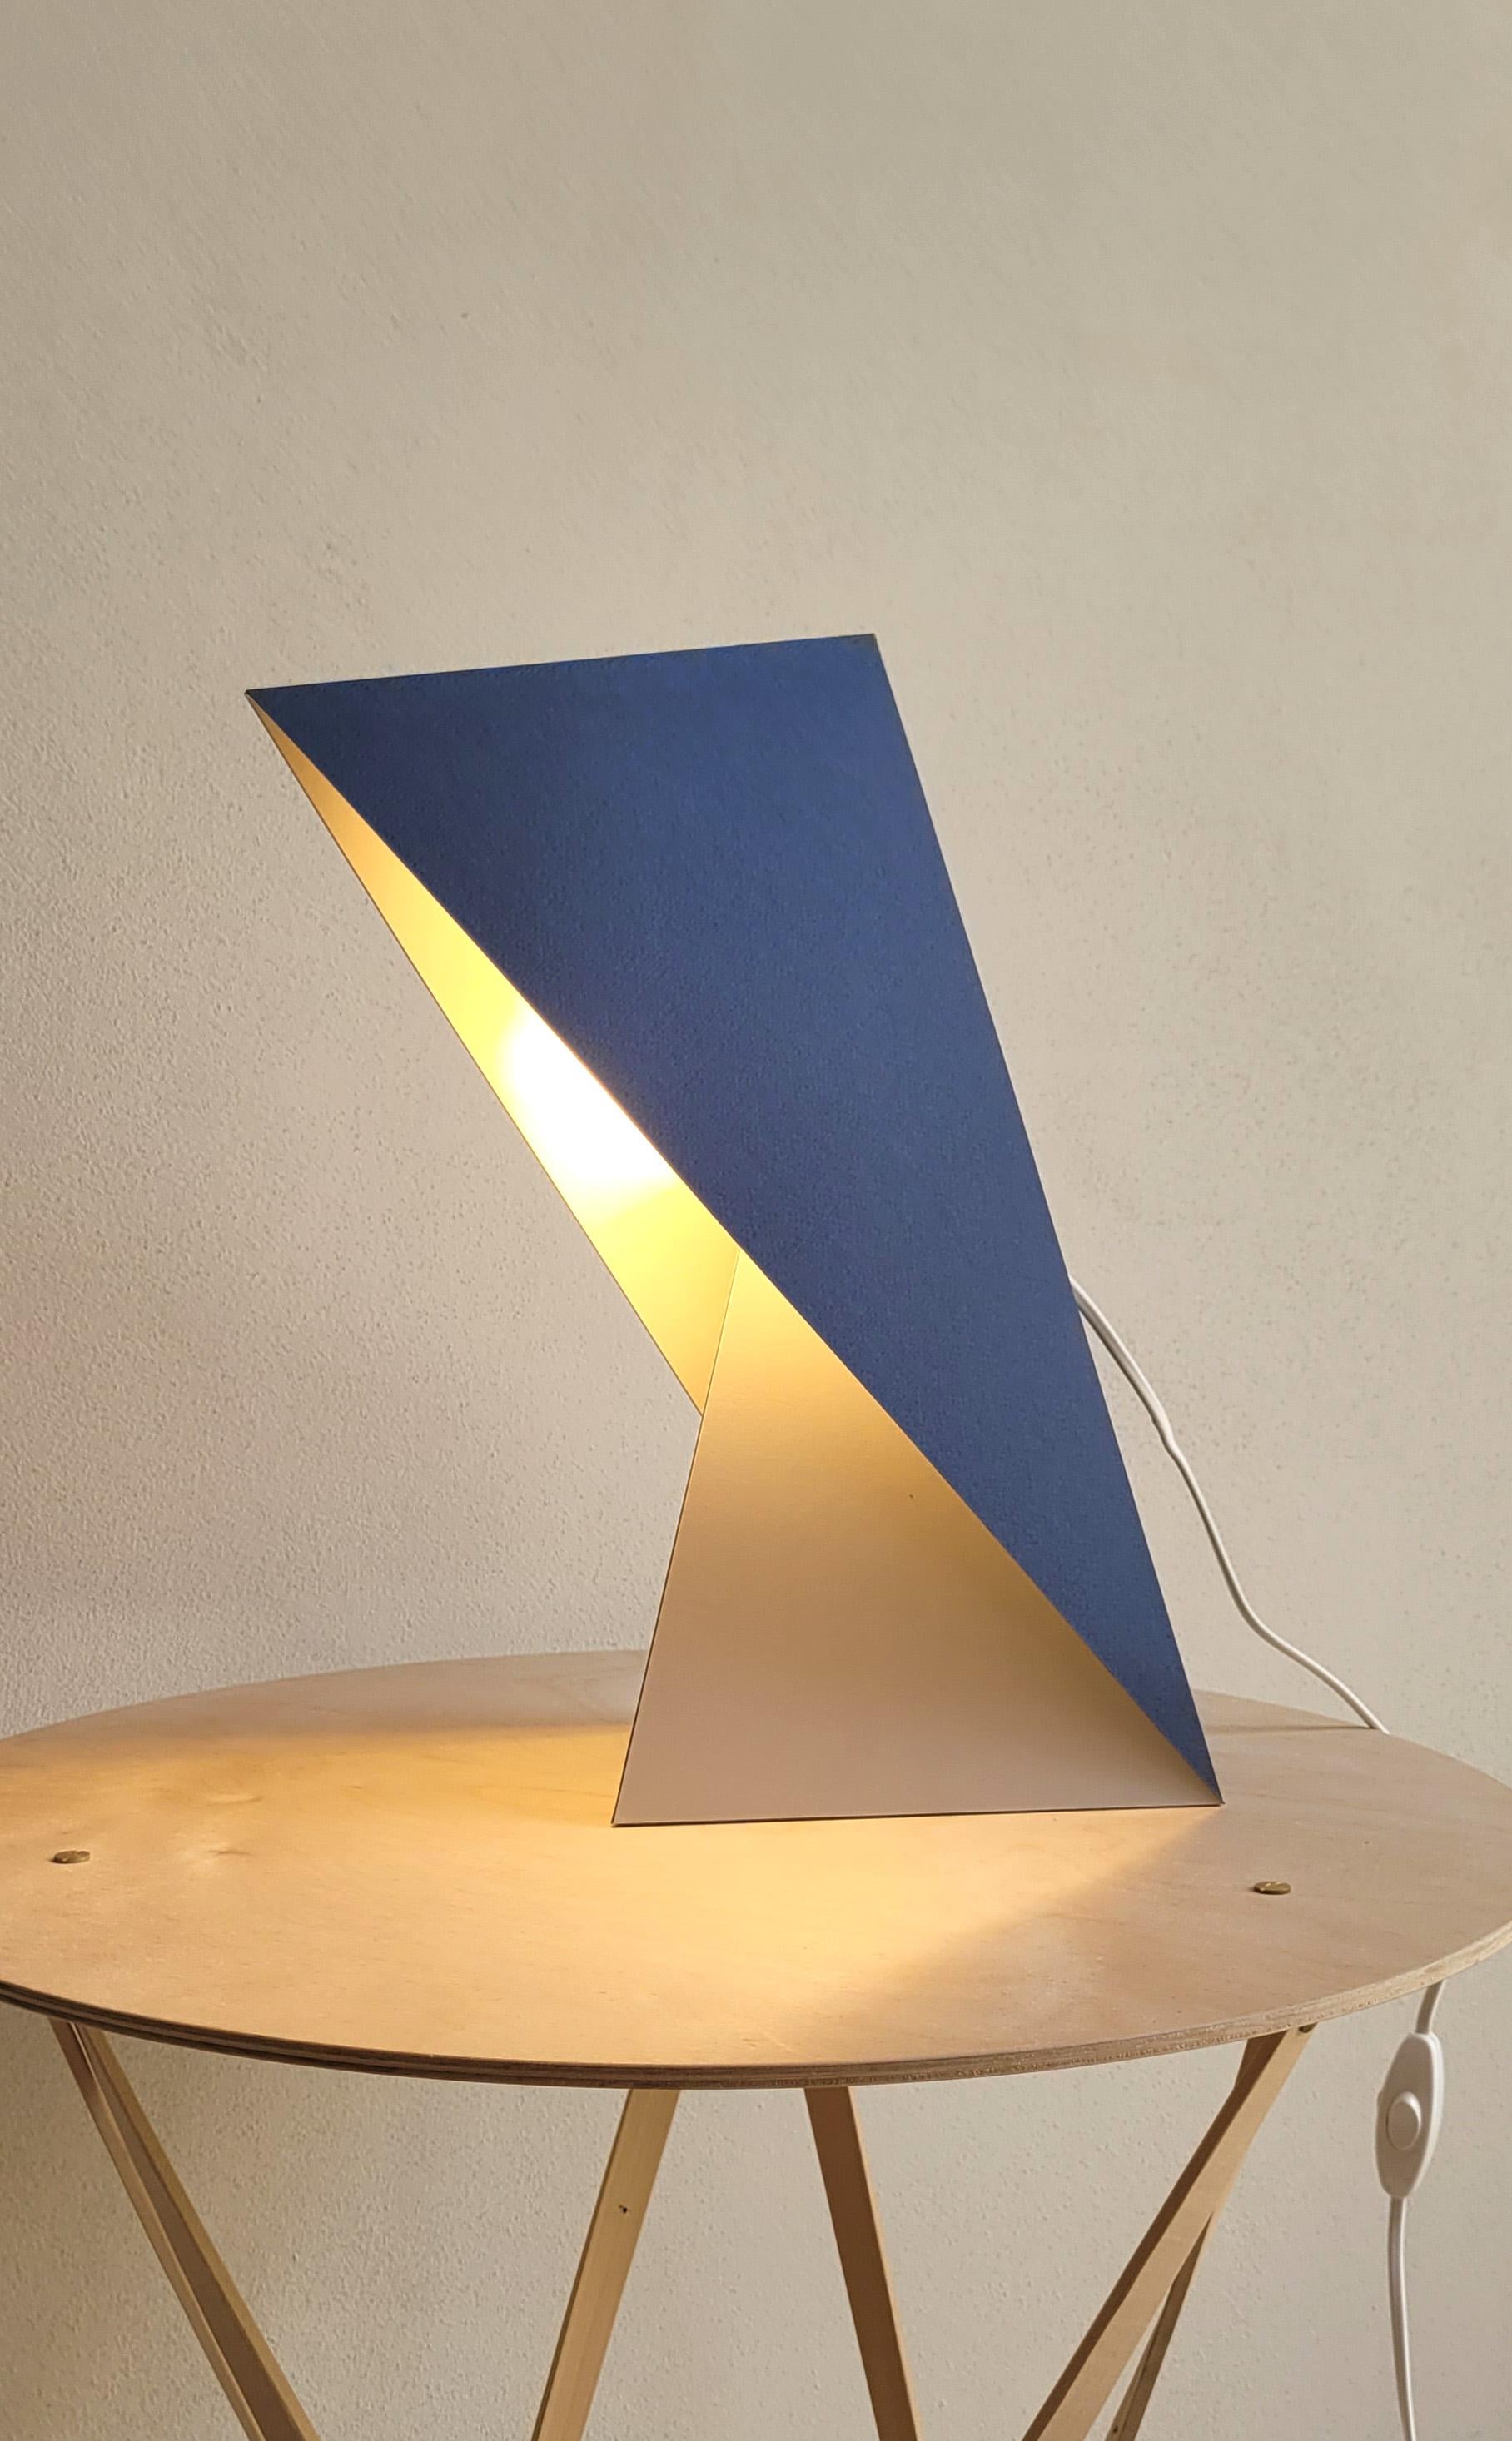 table lamp Stefania, aprile 2022, design by ivdesign
From the ductile lightness of a sheet a series of objects is born, whose minimal lines evoke the ancient Japanese art of origami, 